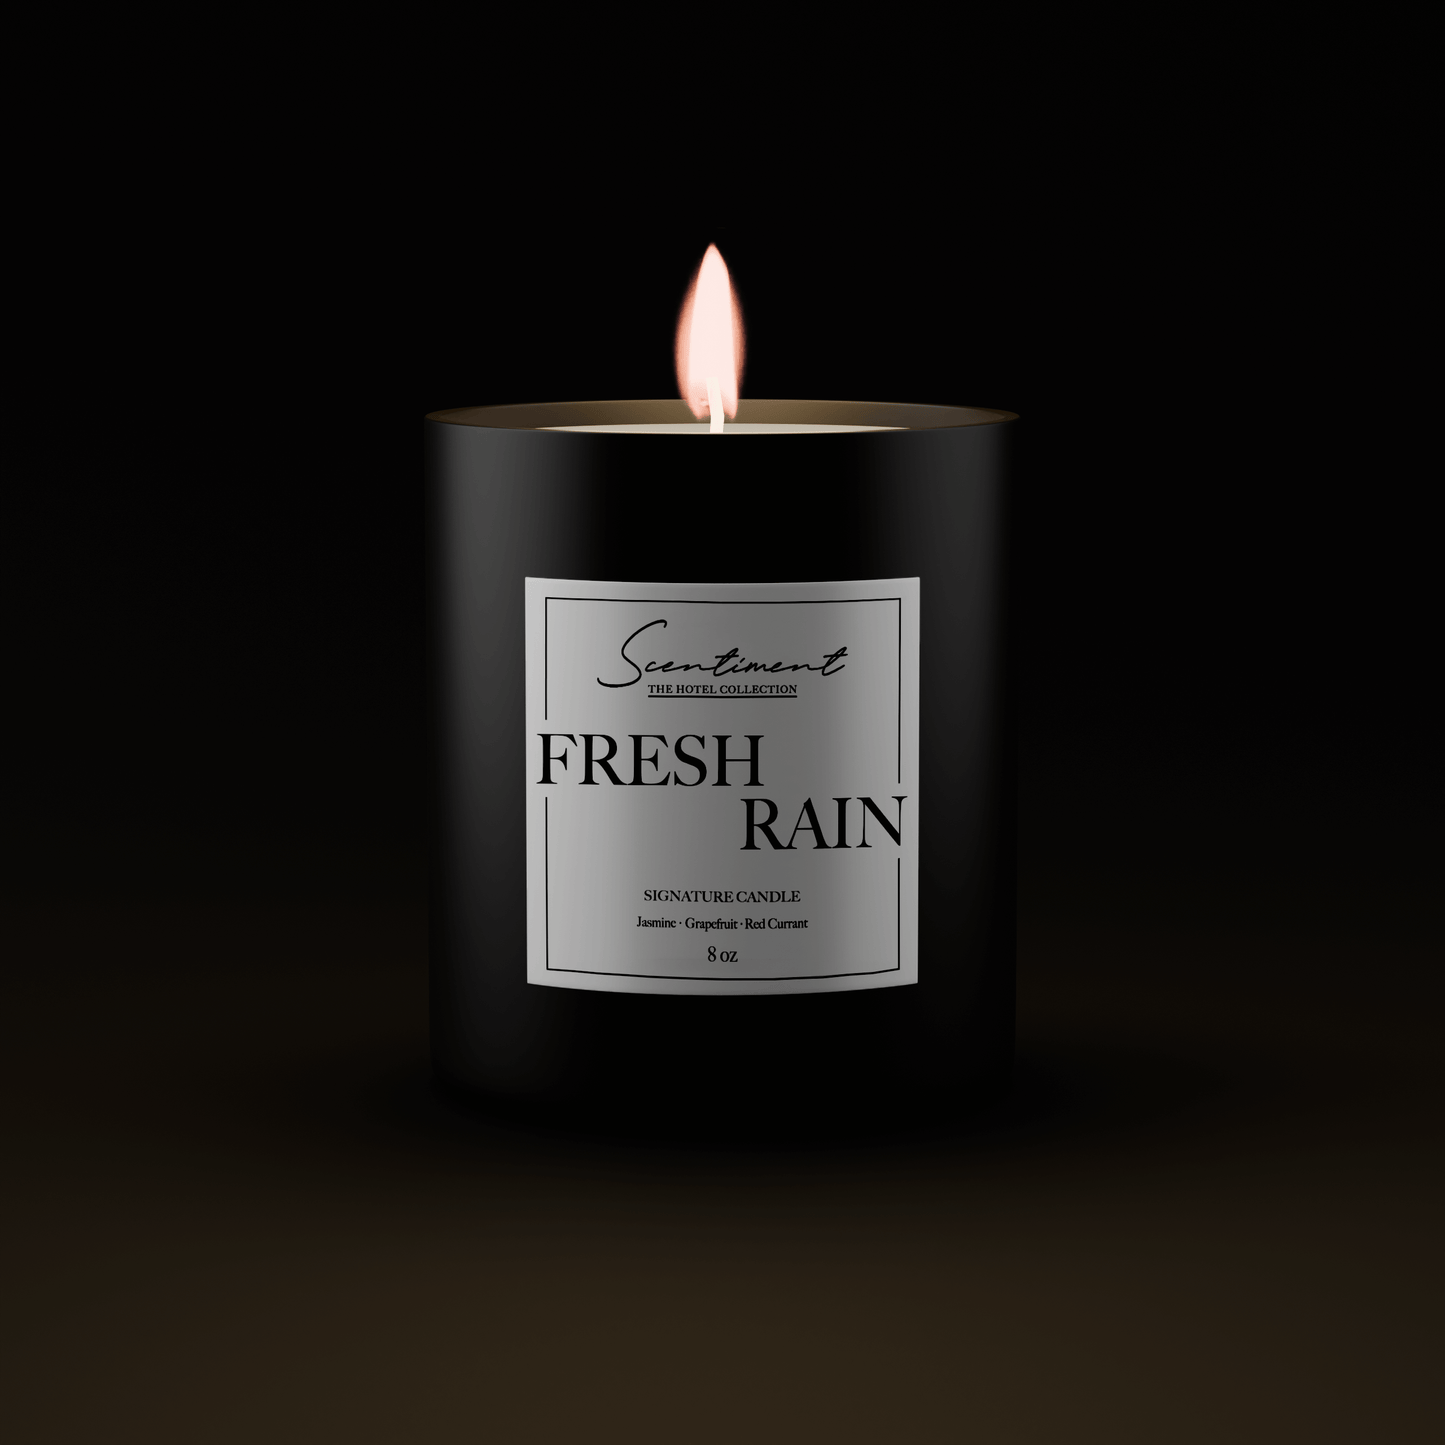 Inspired by Marriott® hotels, Fresh Rain Candle 